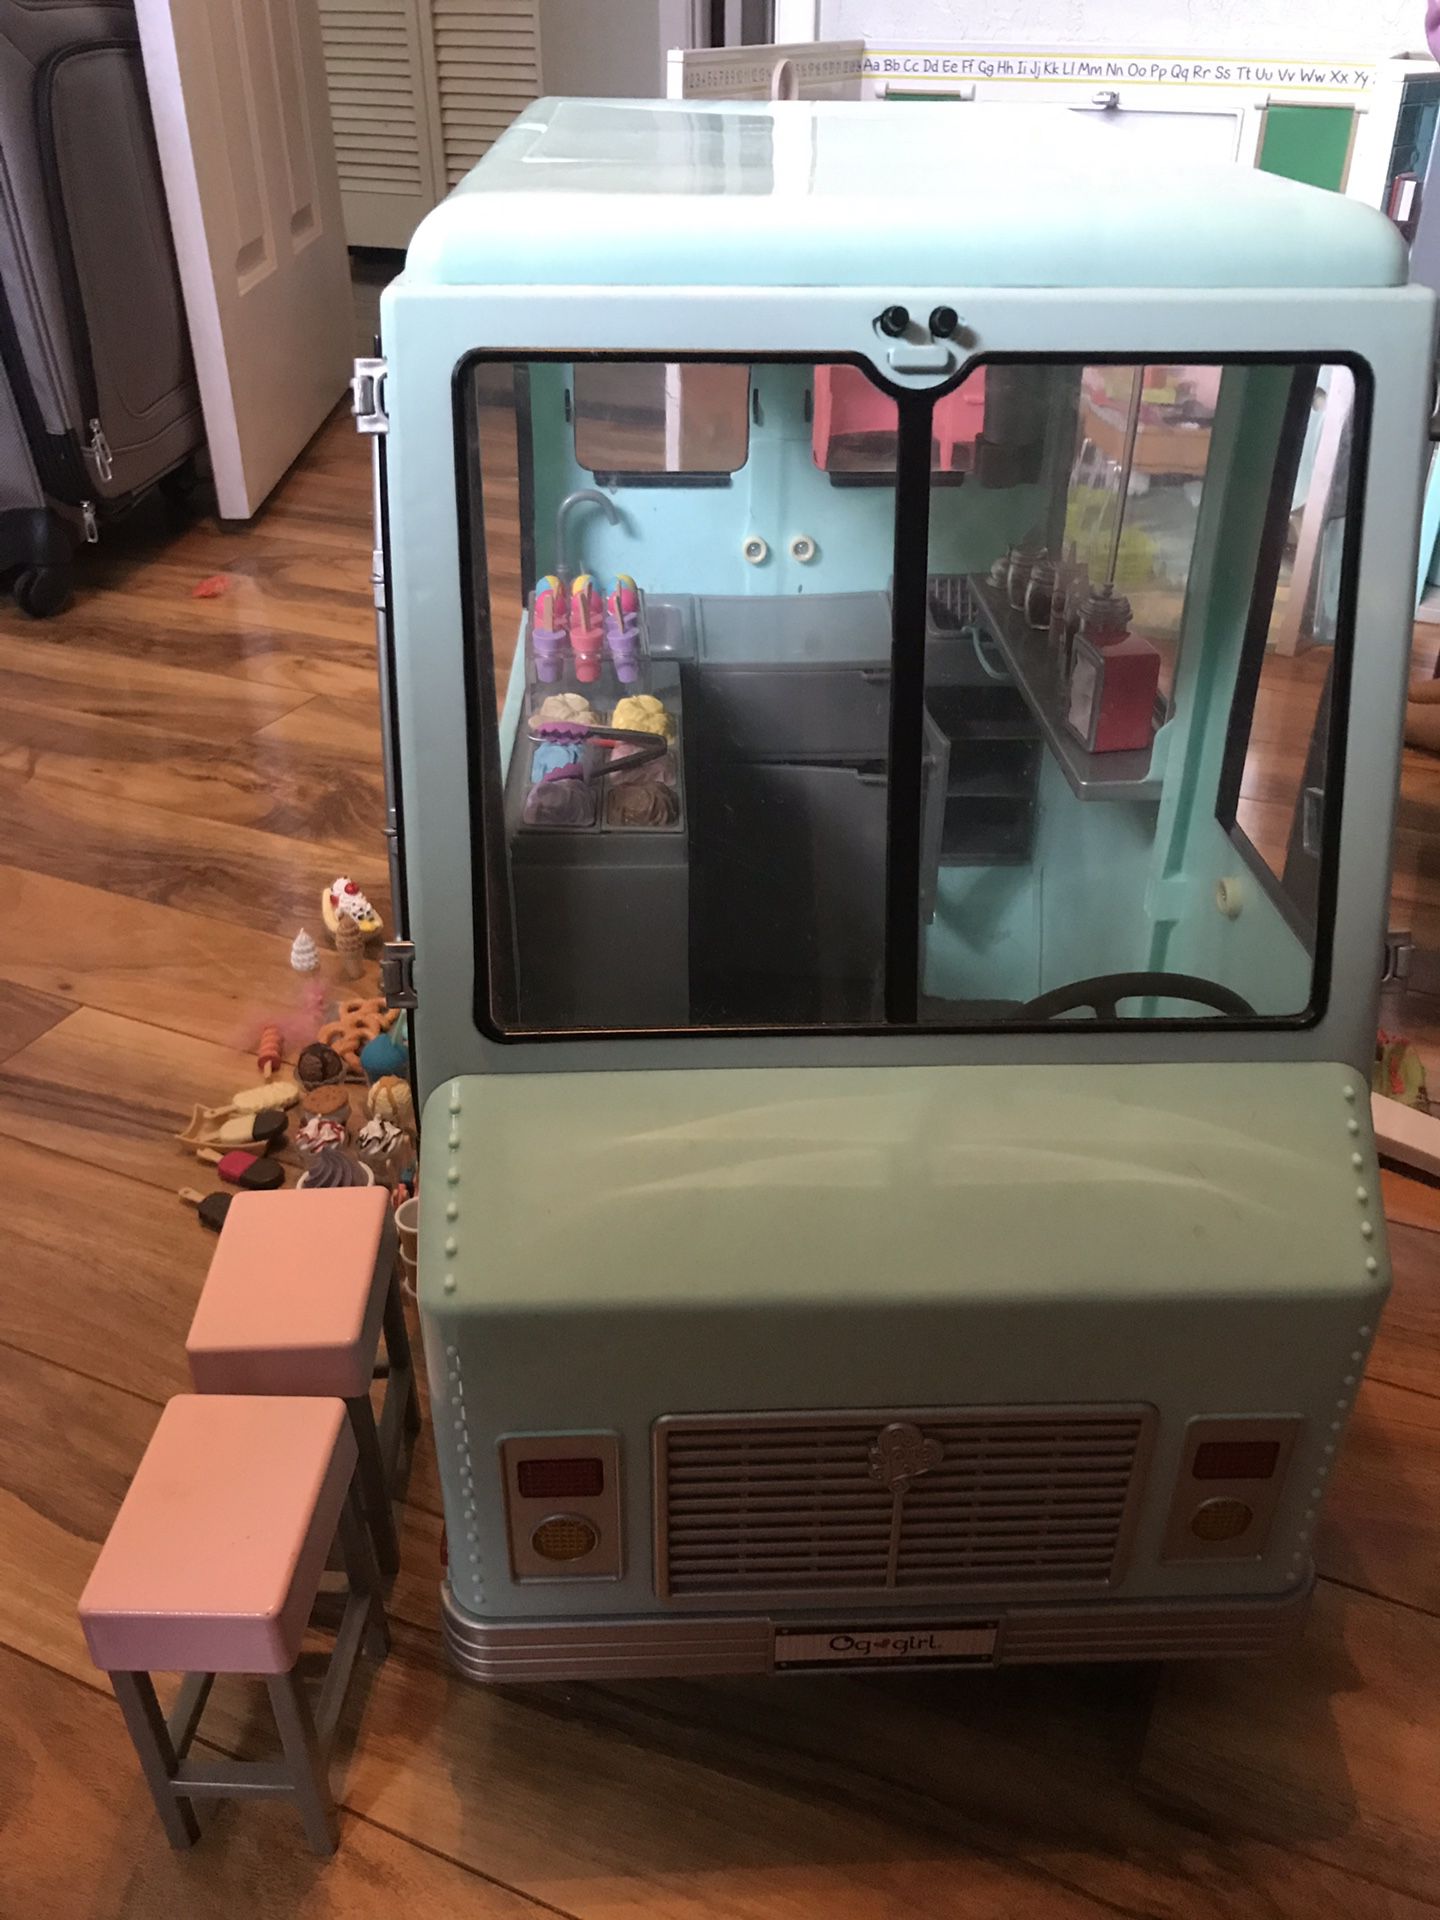 American girl doll ice cream truck(our generation)